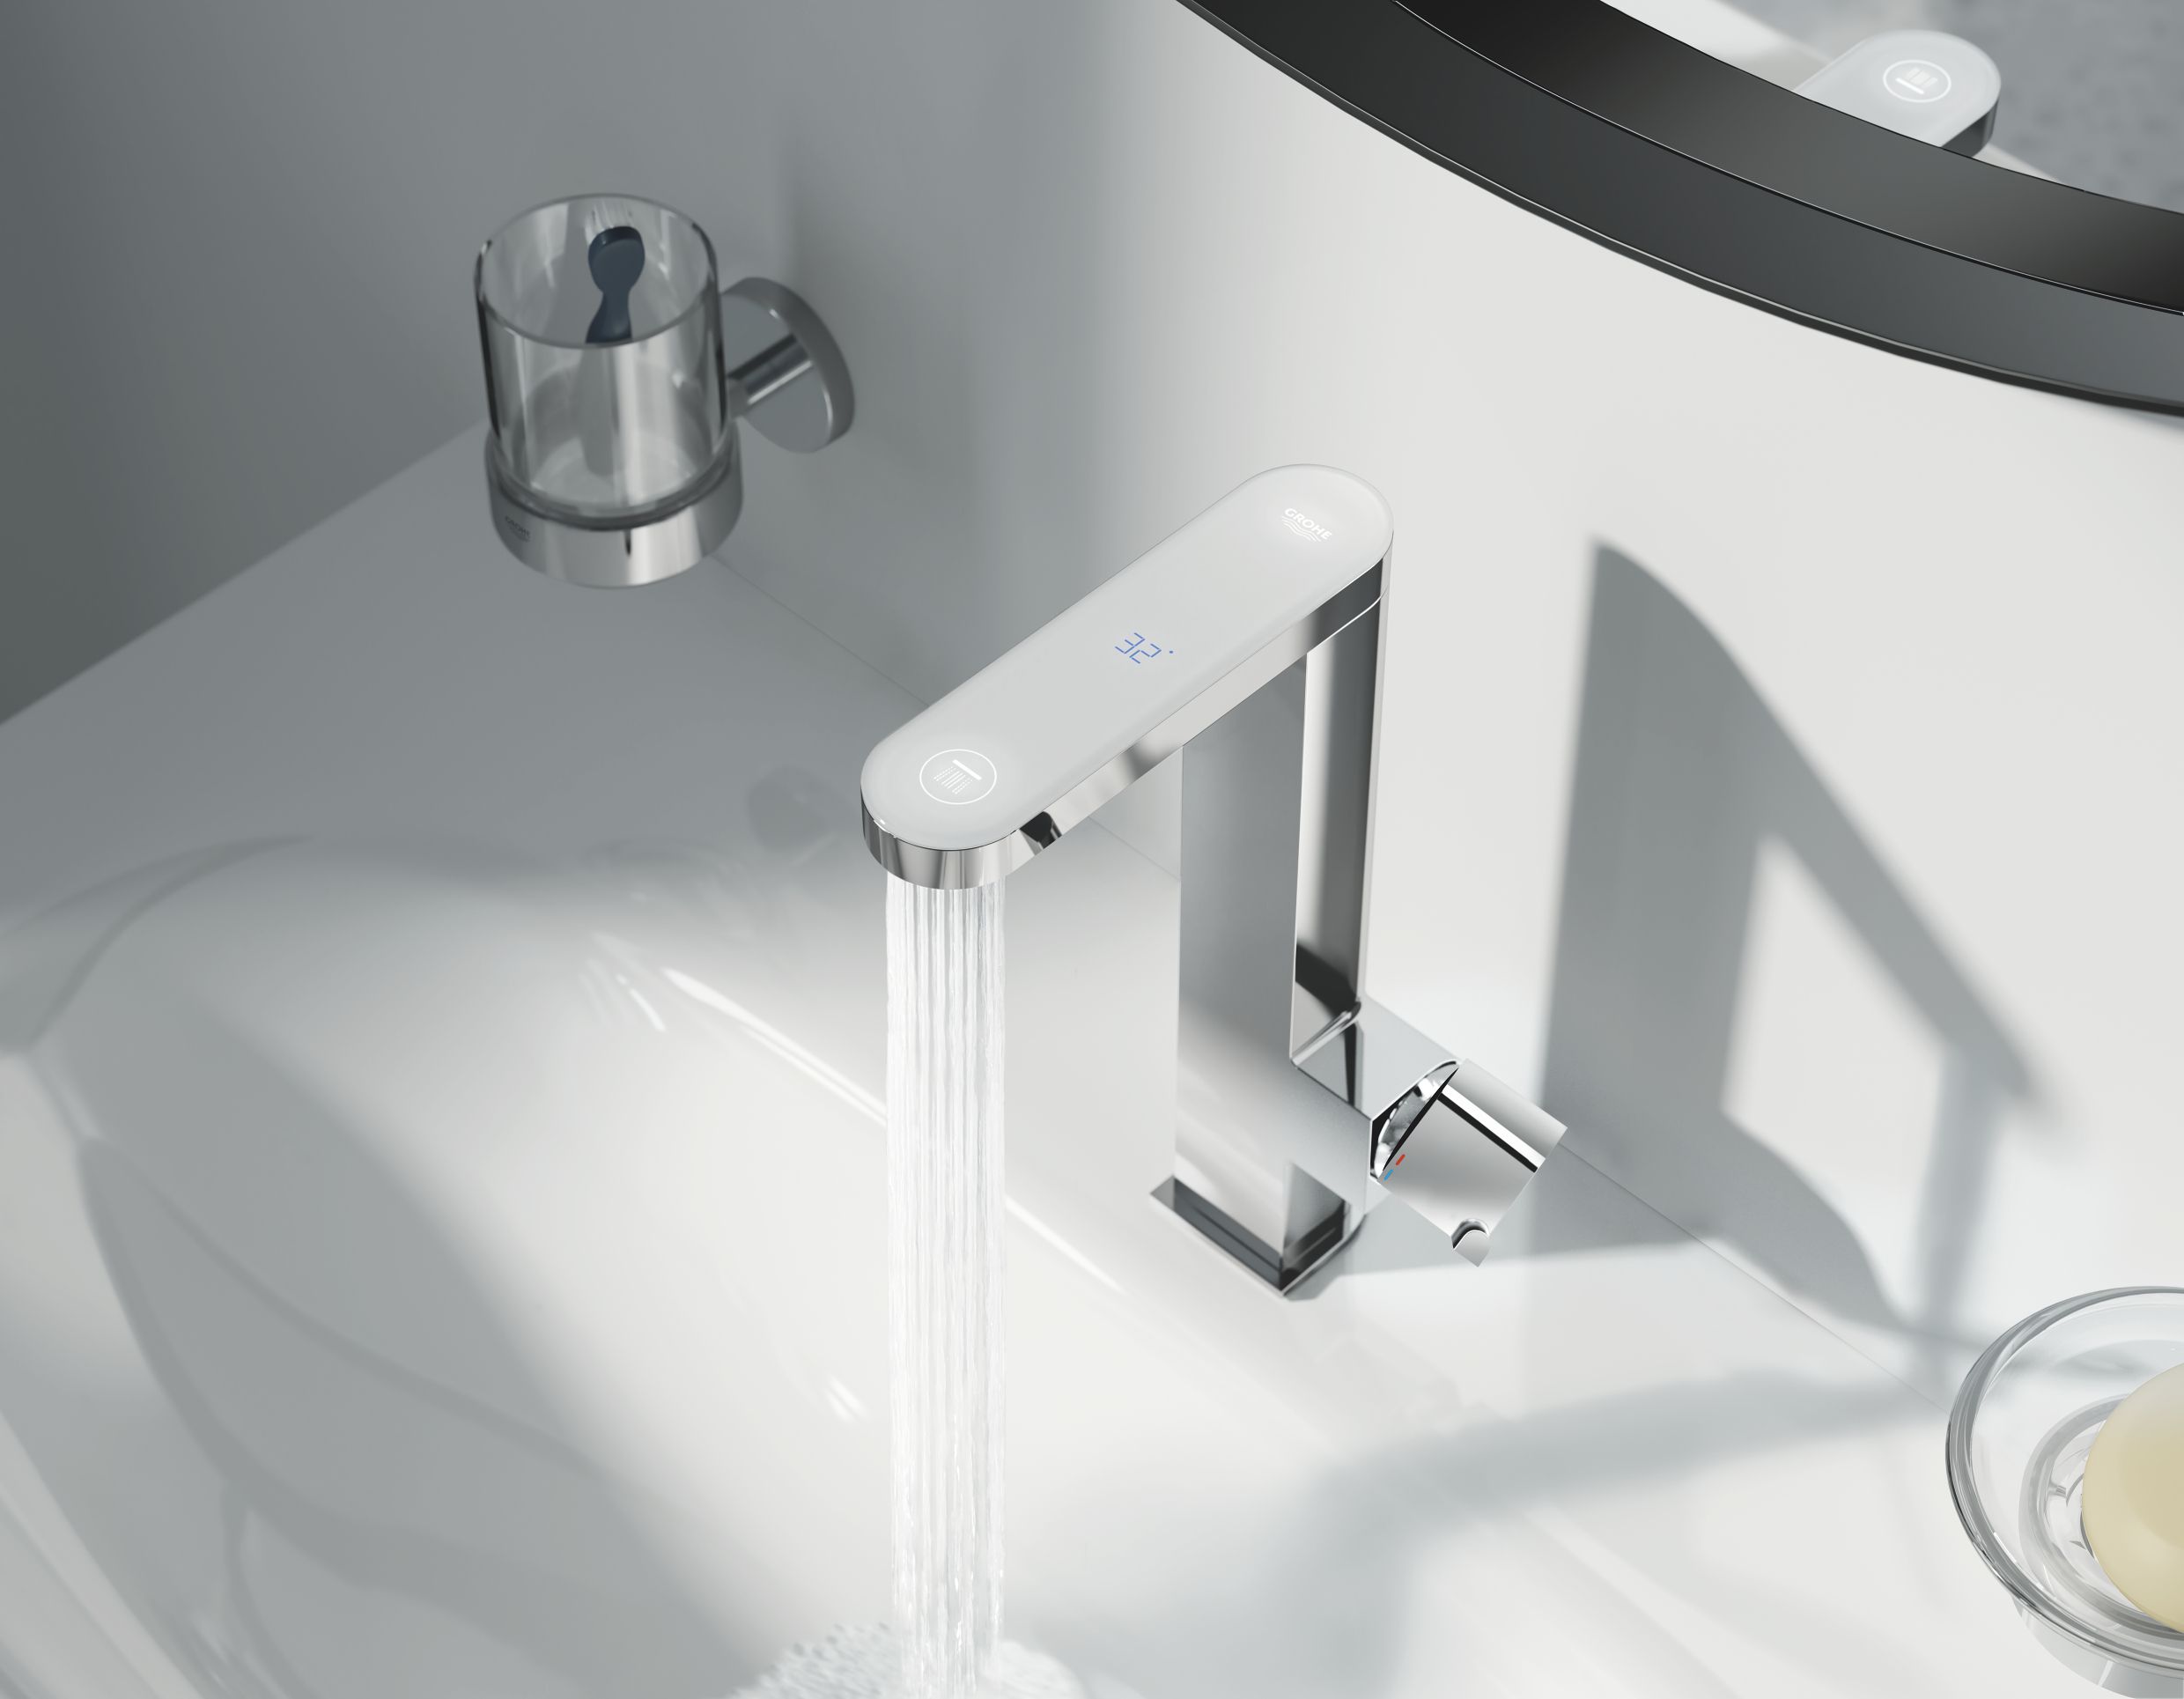 GROHE Plus tap with digital temperature display